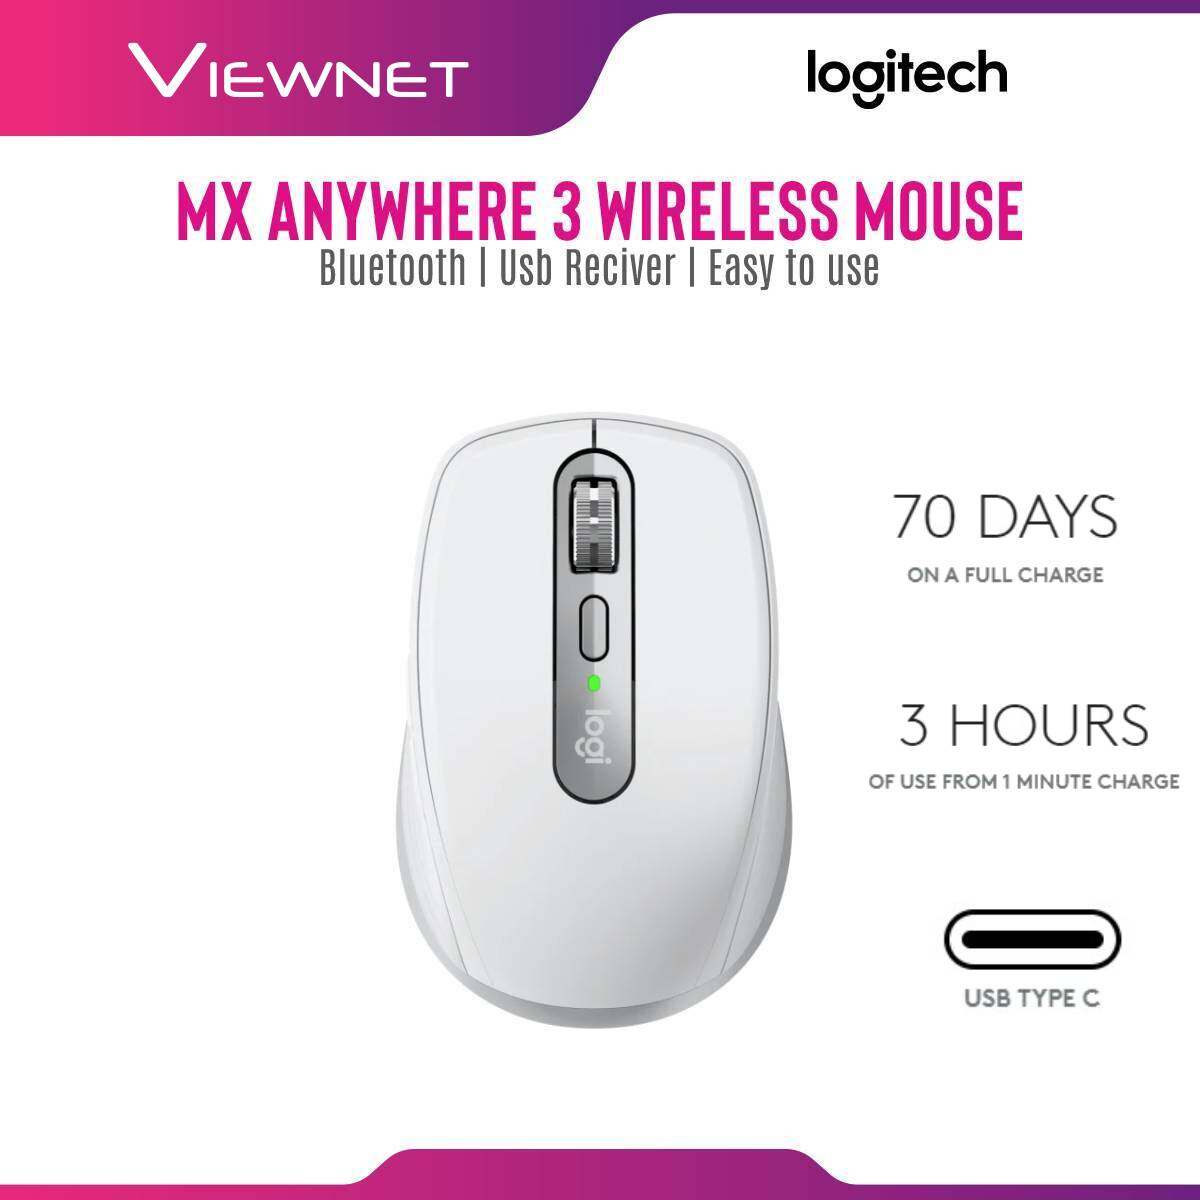 Logitech MX Anywhere 3 Master series of wireless mouse Ultimate versatility with remarkable performance